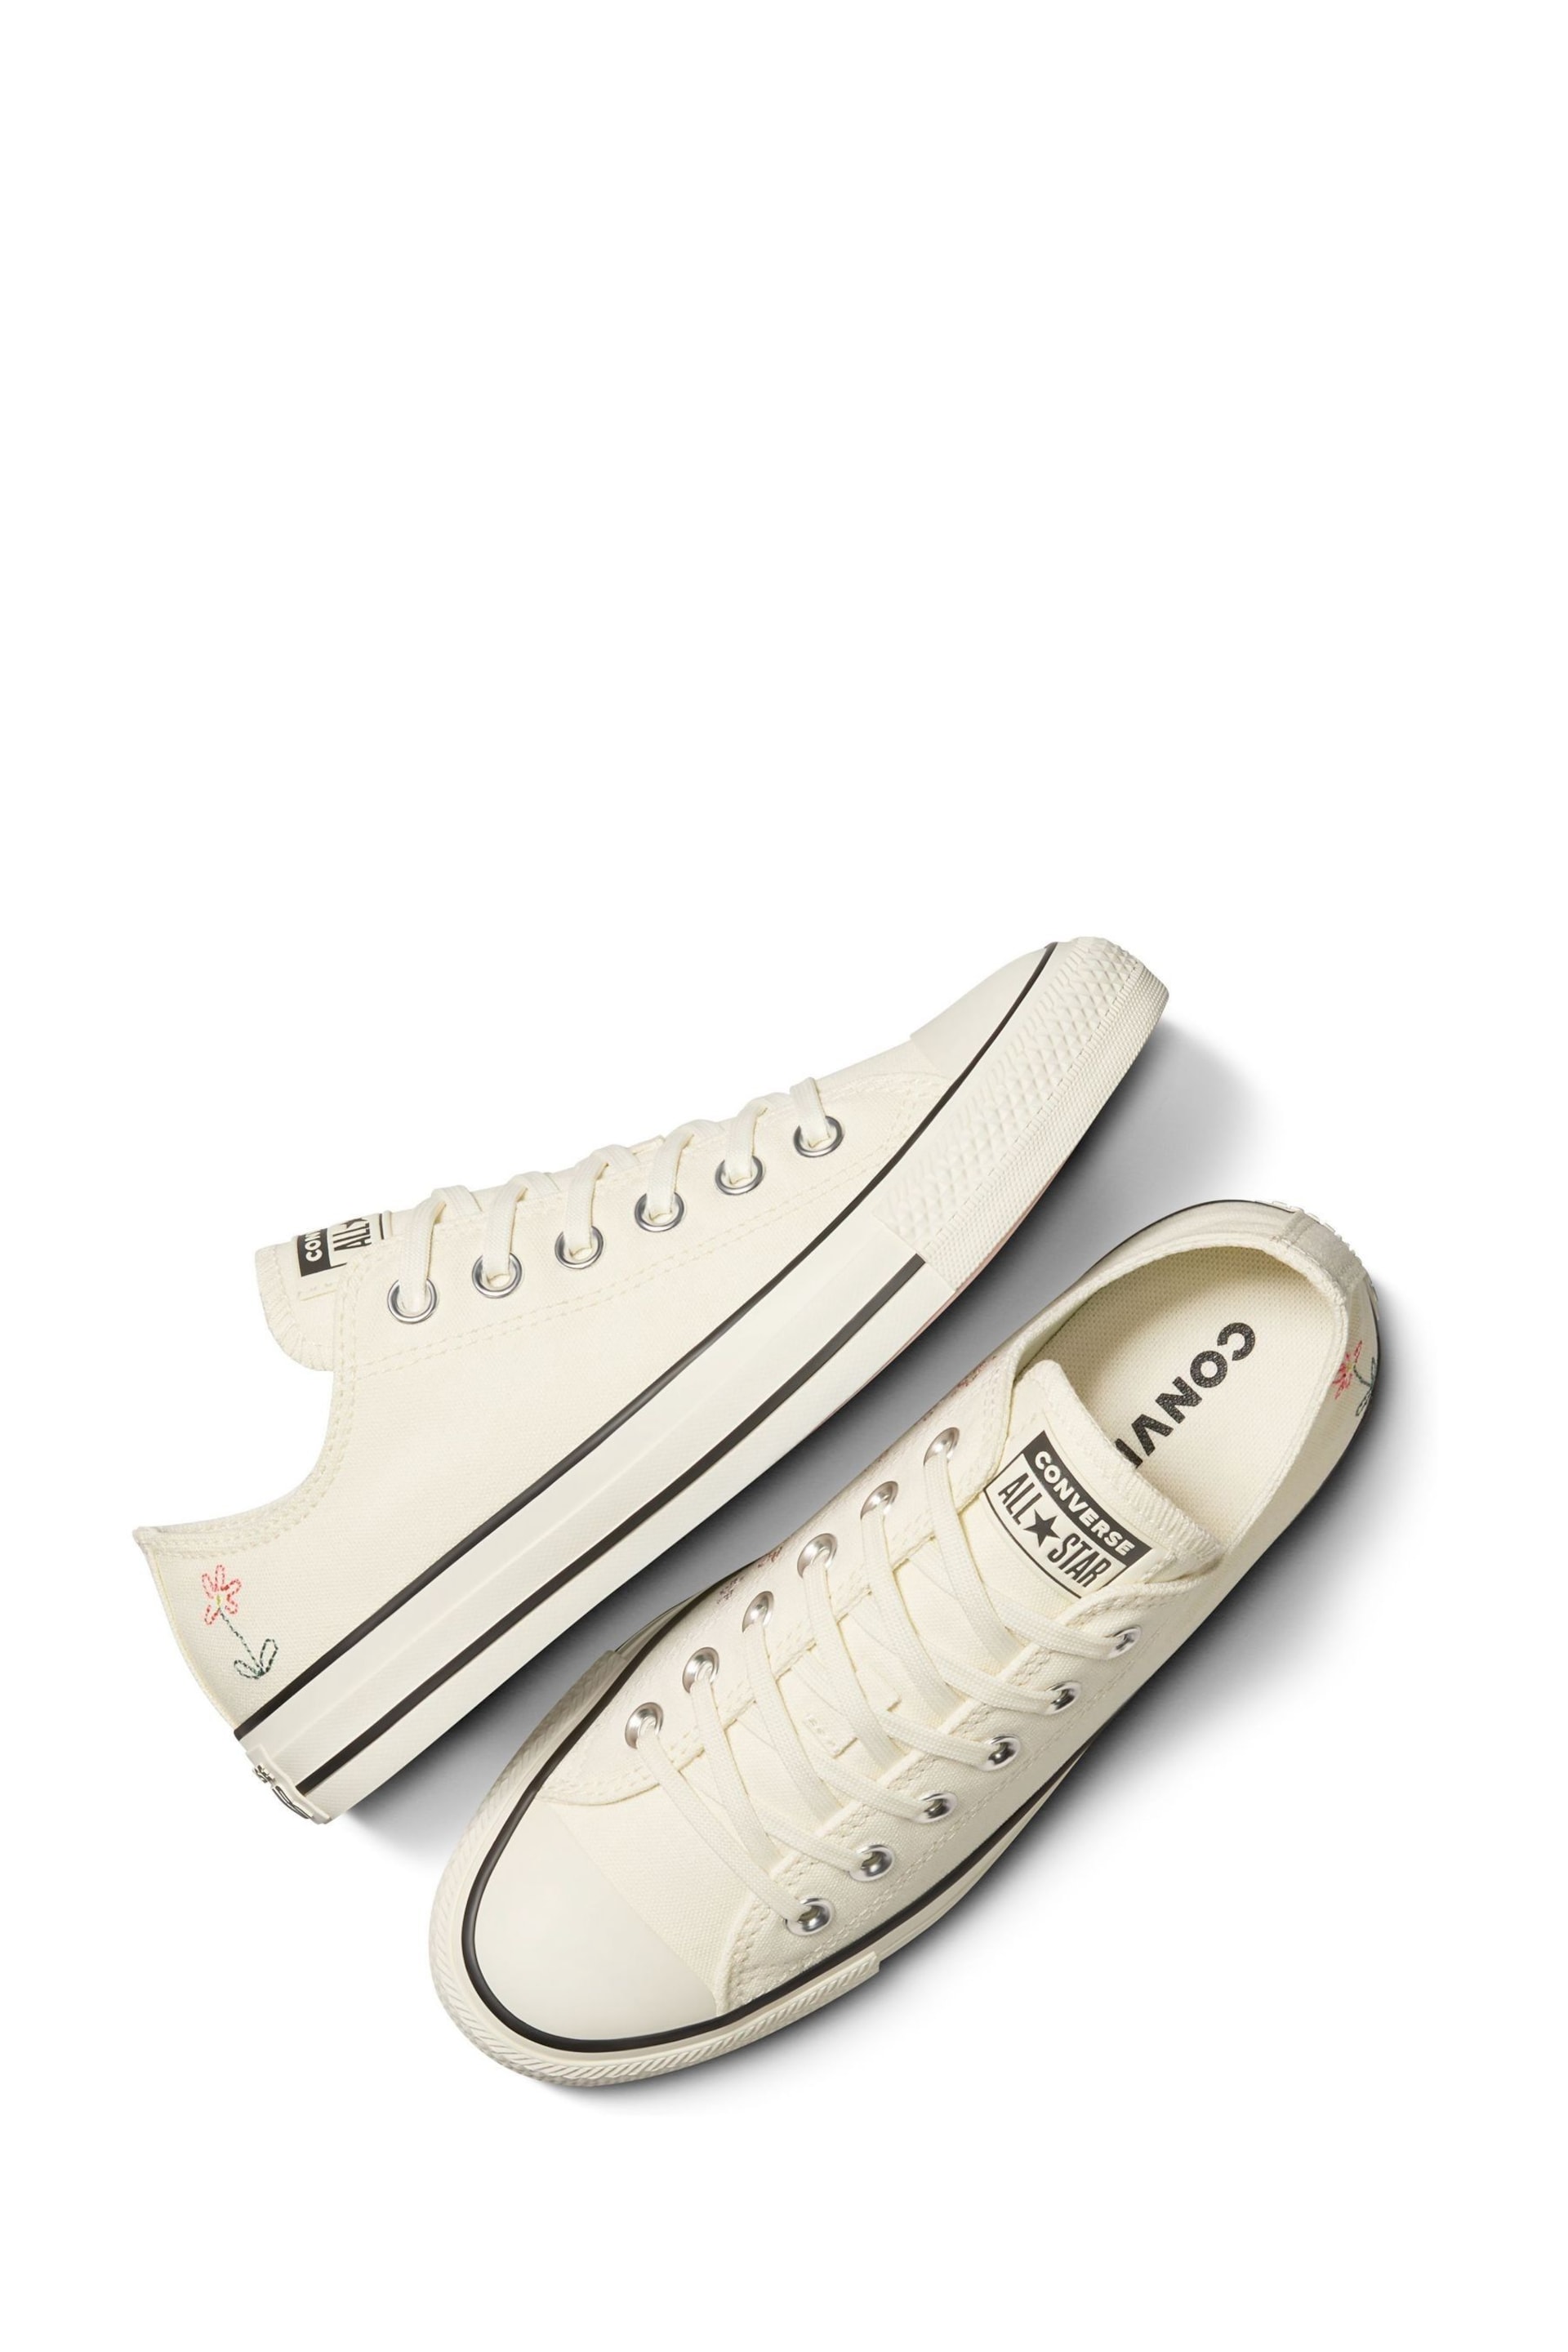 Converse Cream Chuck Taylor All Star Ox Trainers - Image 7 of 11